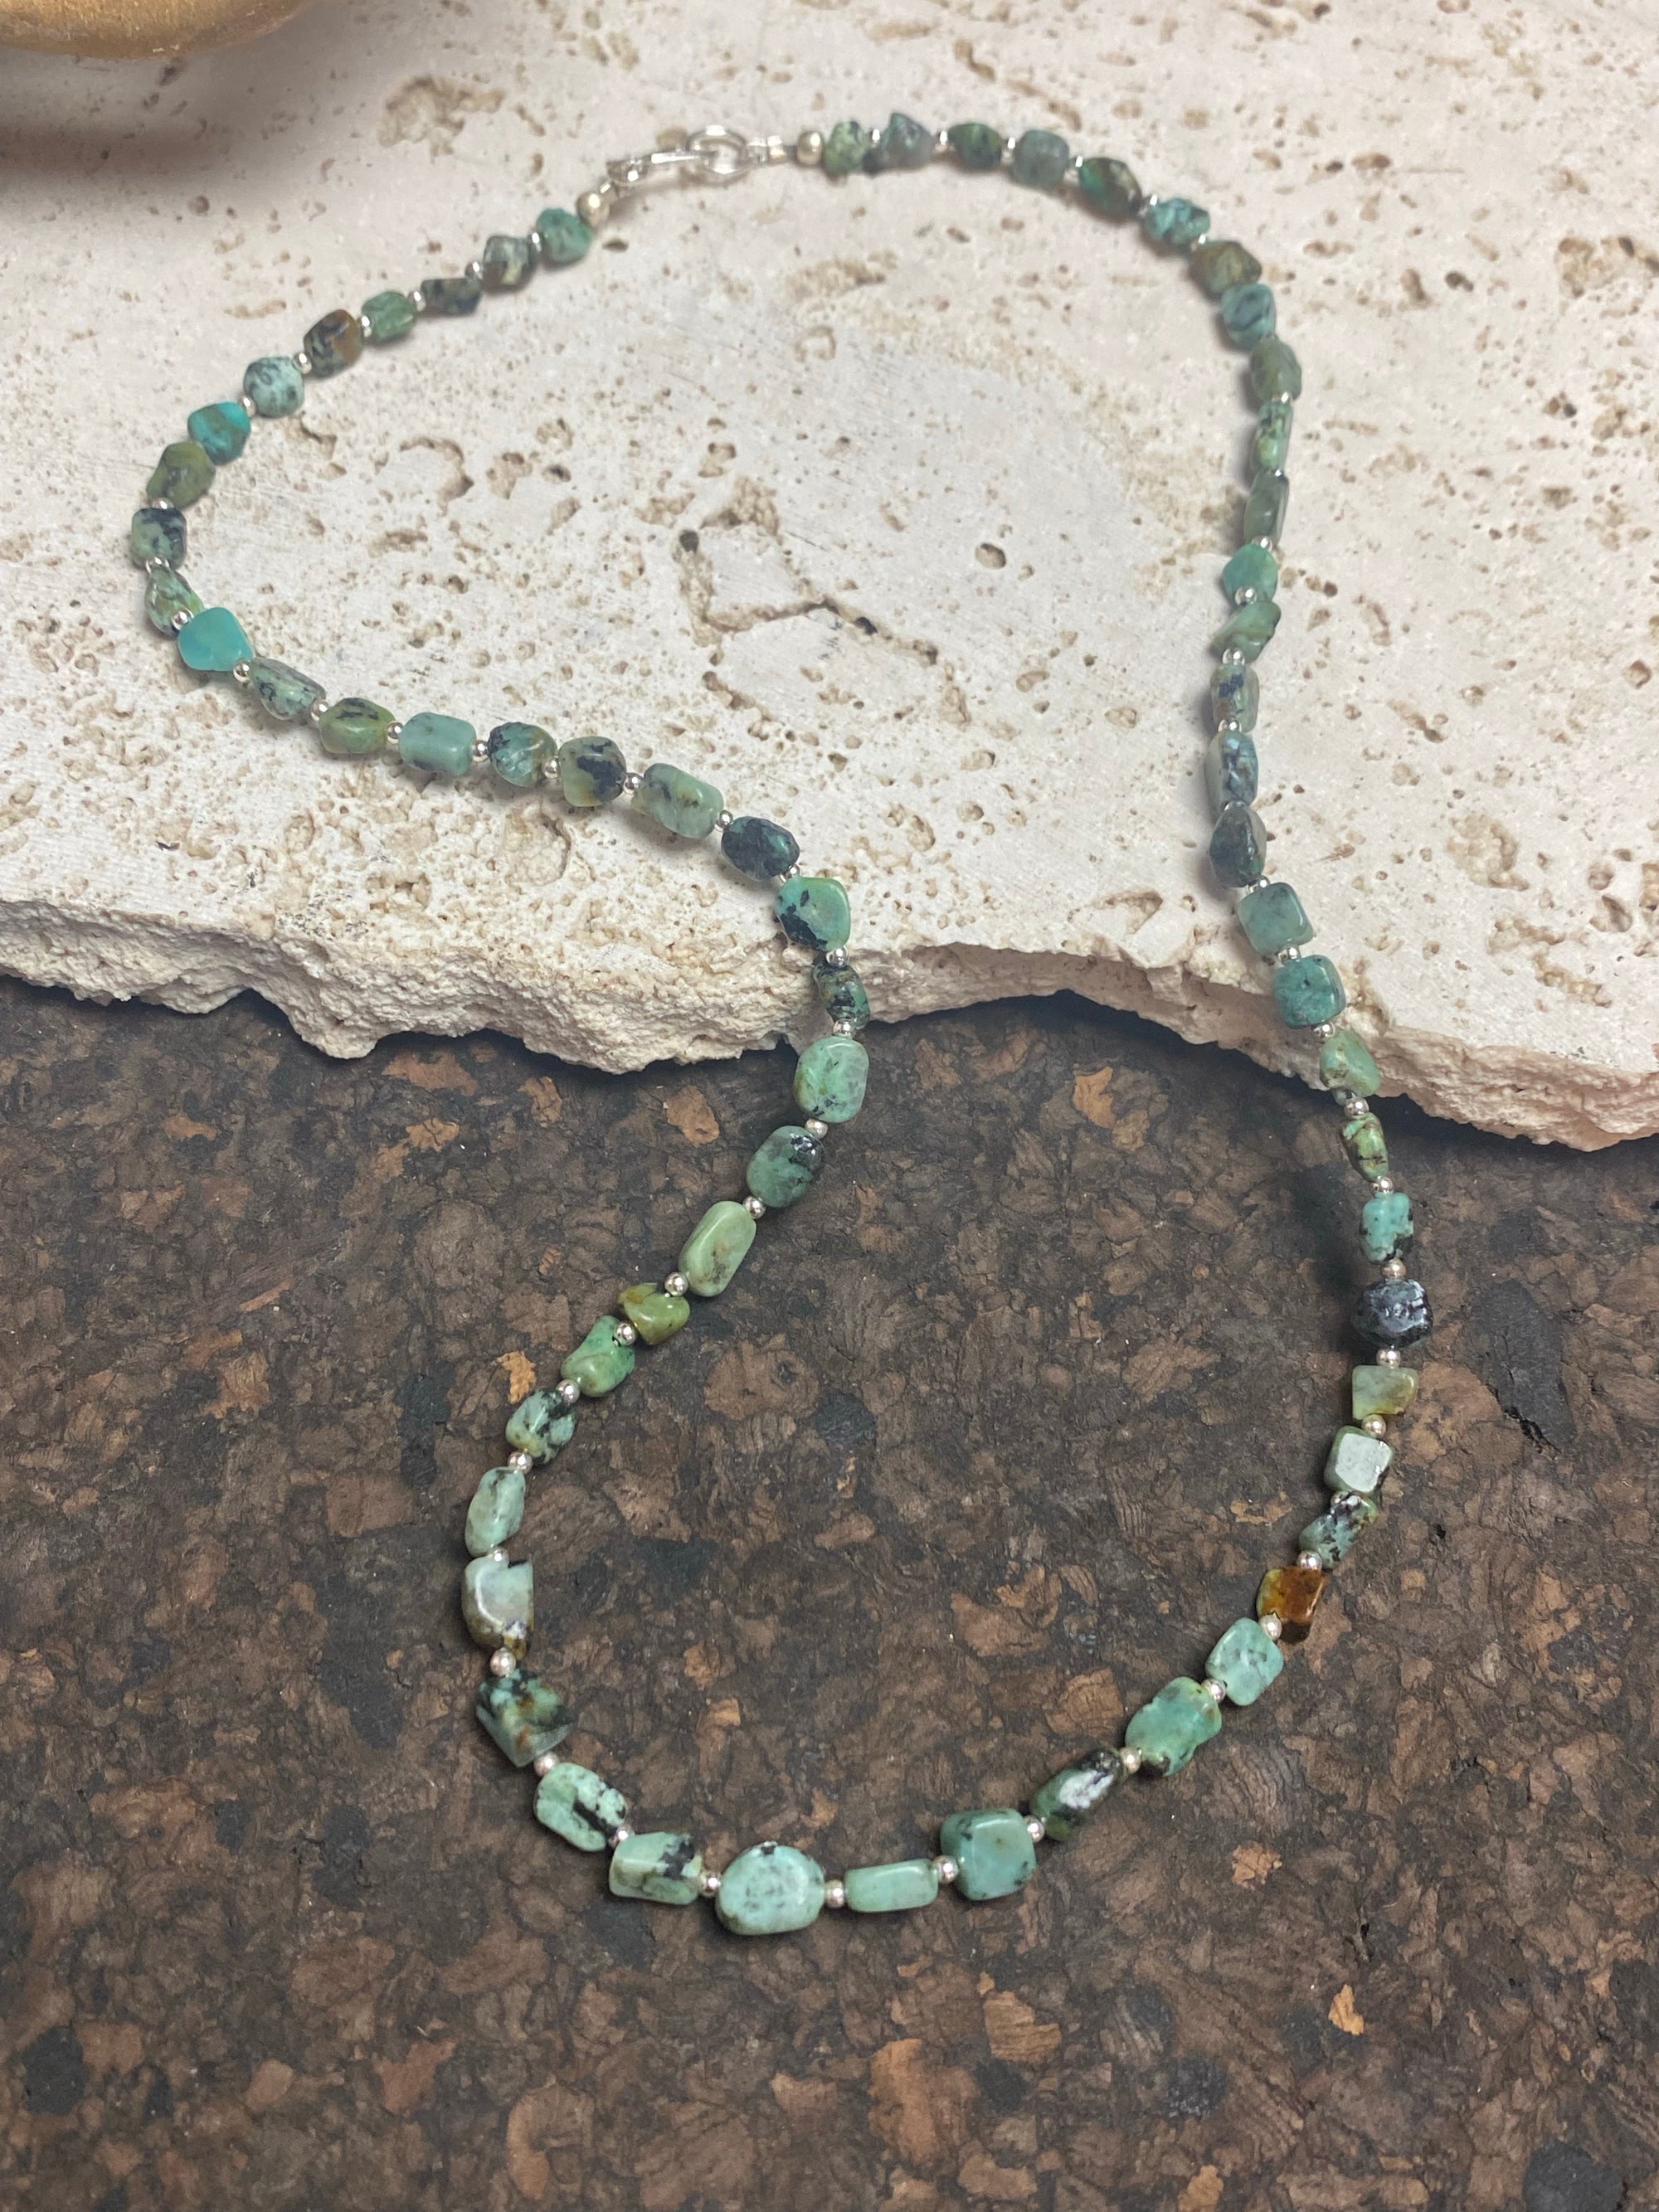 African turquoise boulder necklace with sterling silver bead highlighting